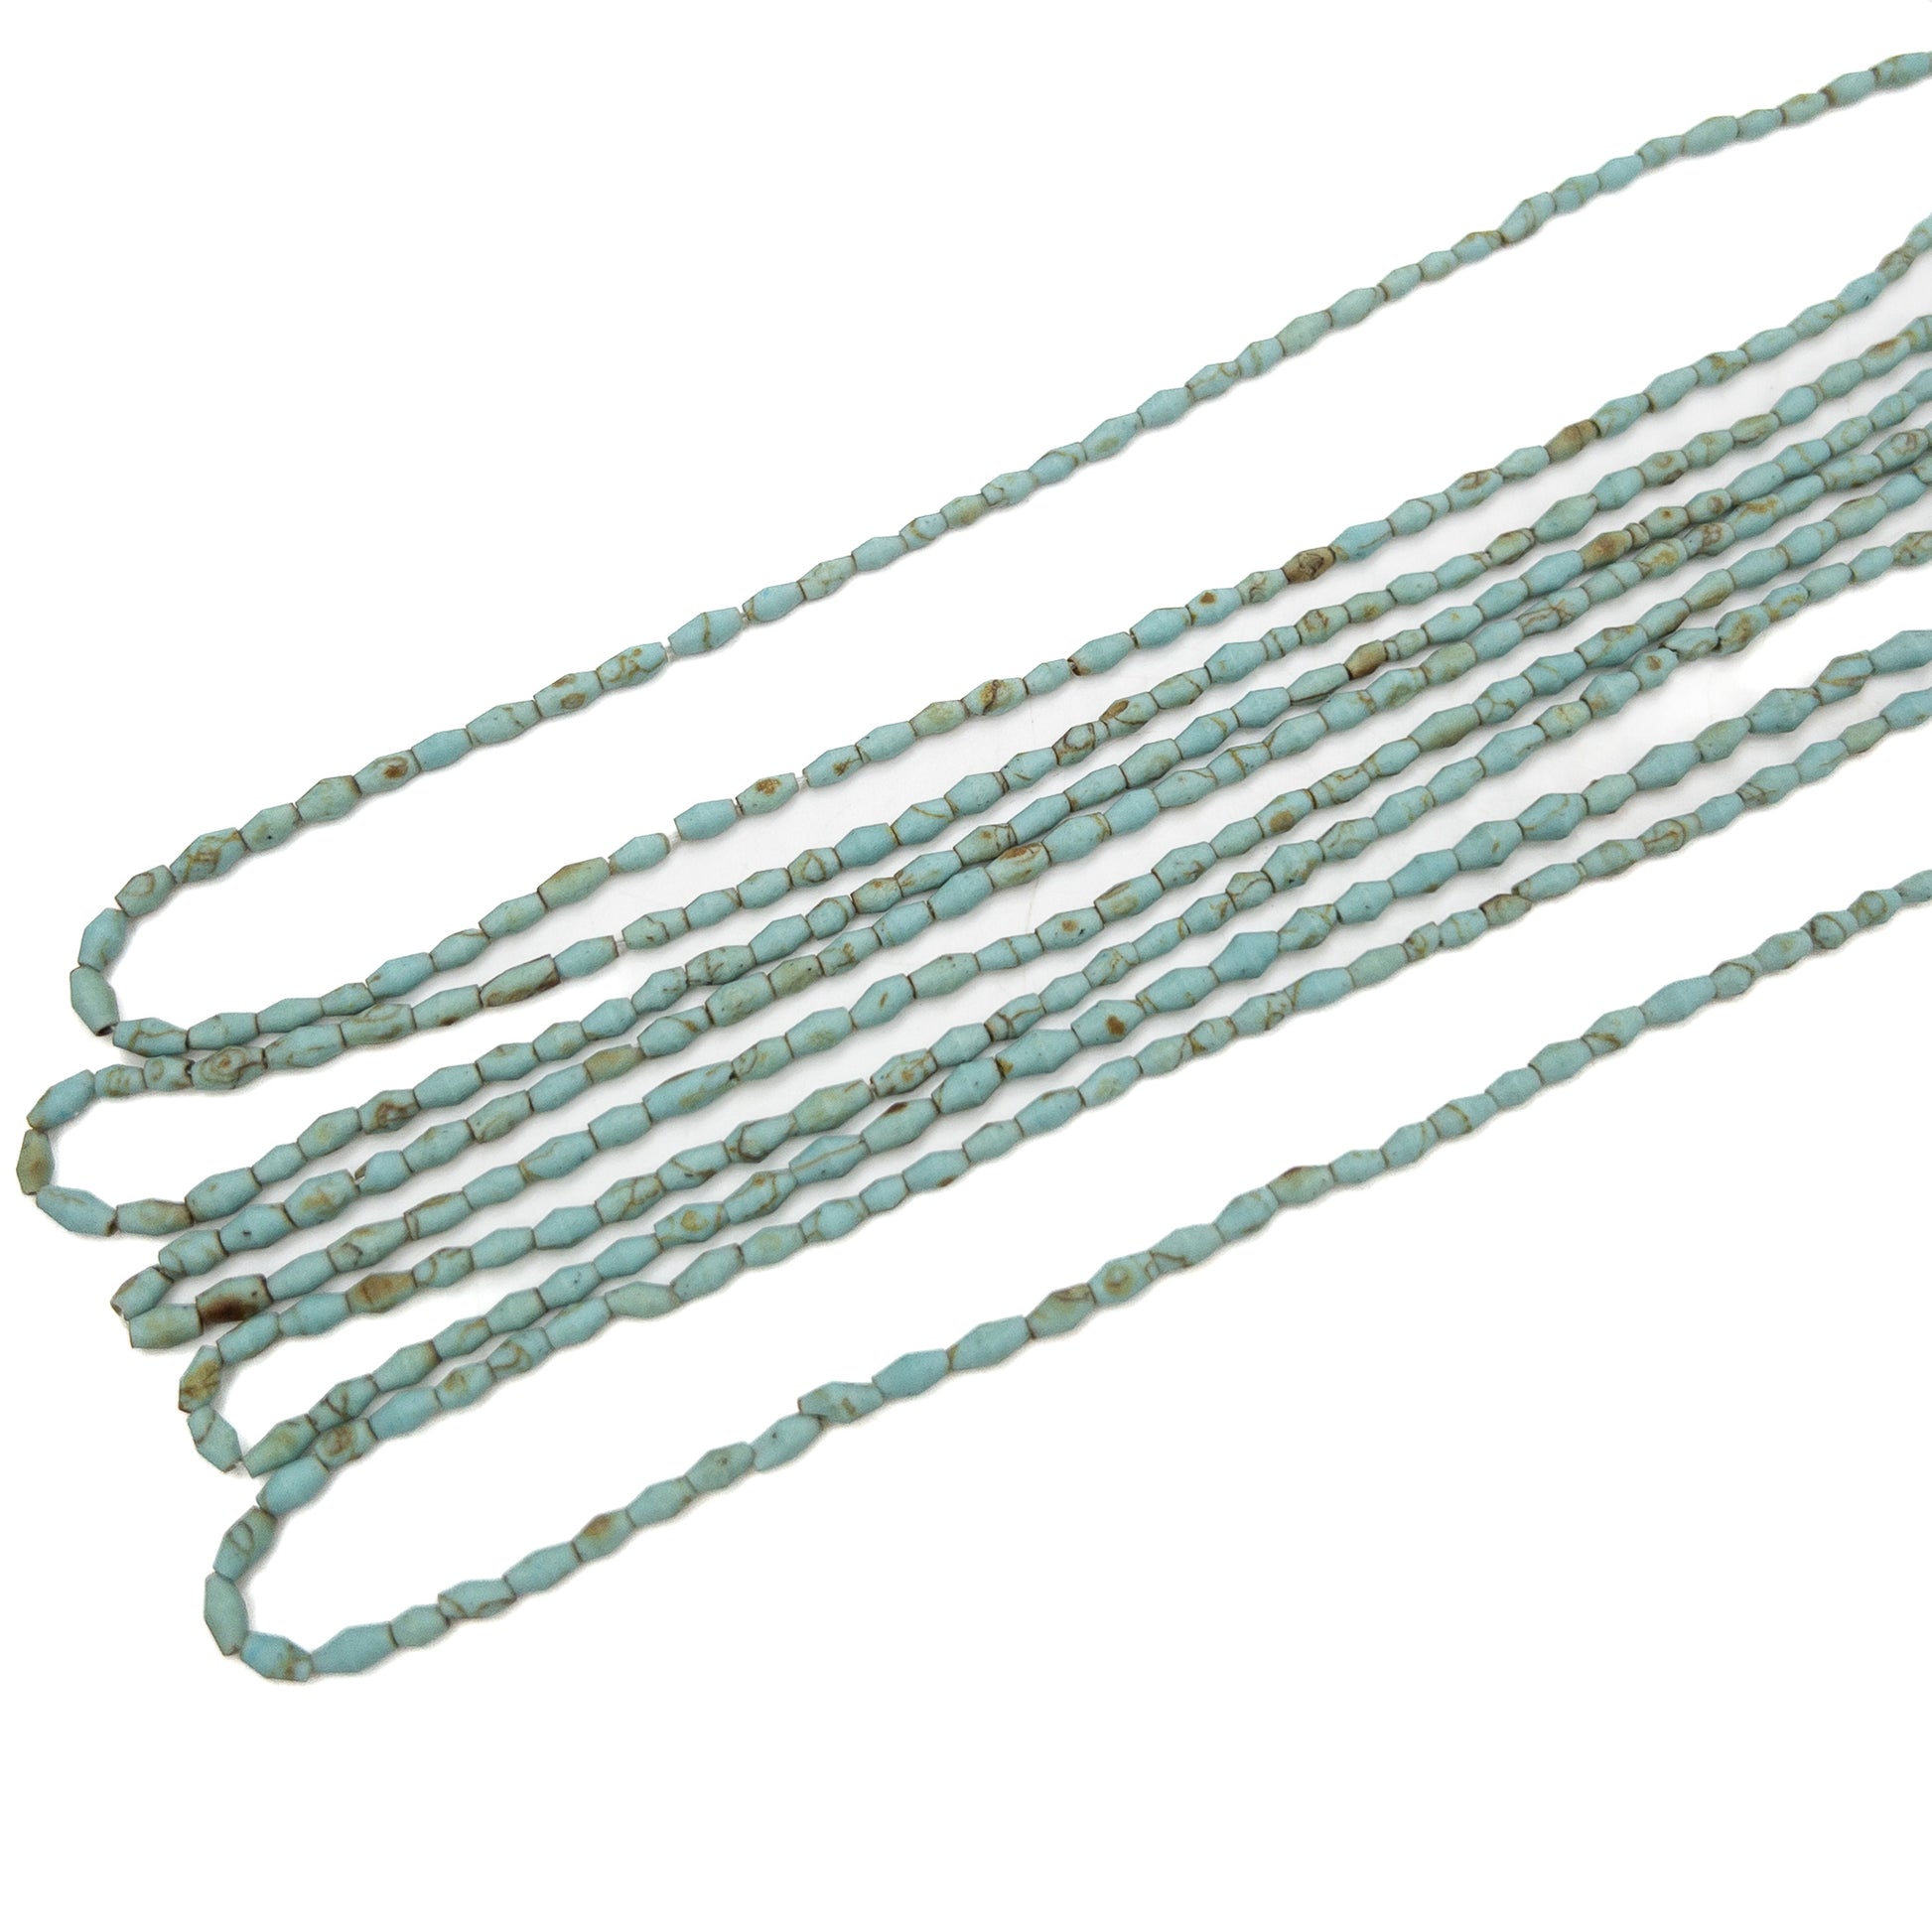 Light Blue Turquoise Matte 2.5mm Rustic Long Bicone Bead - 12" Strand